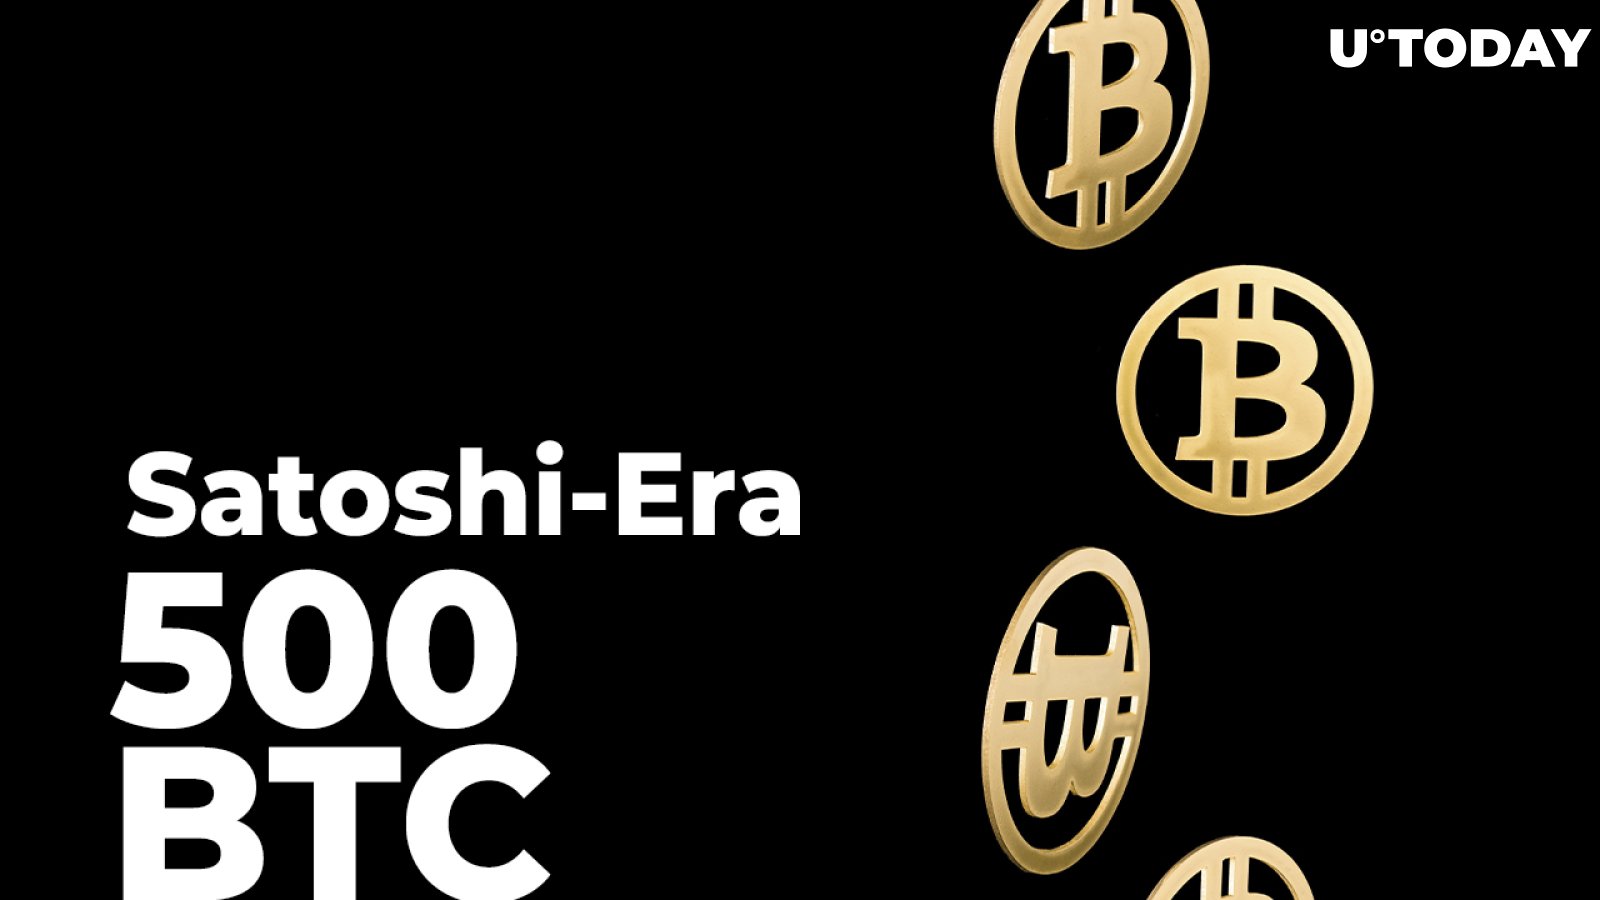 Activated Satoshi-Era Bitcoin Address with 500 BTC Now Worth 2,808x More Than in 2011